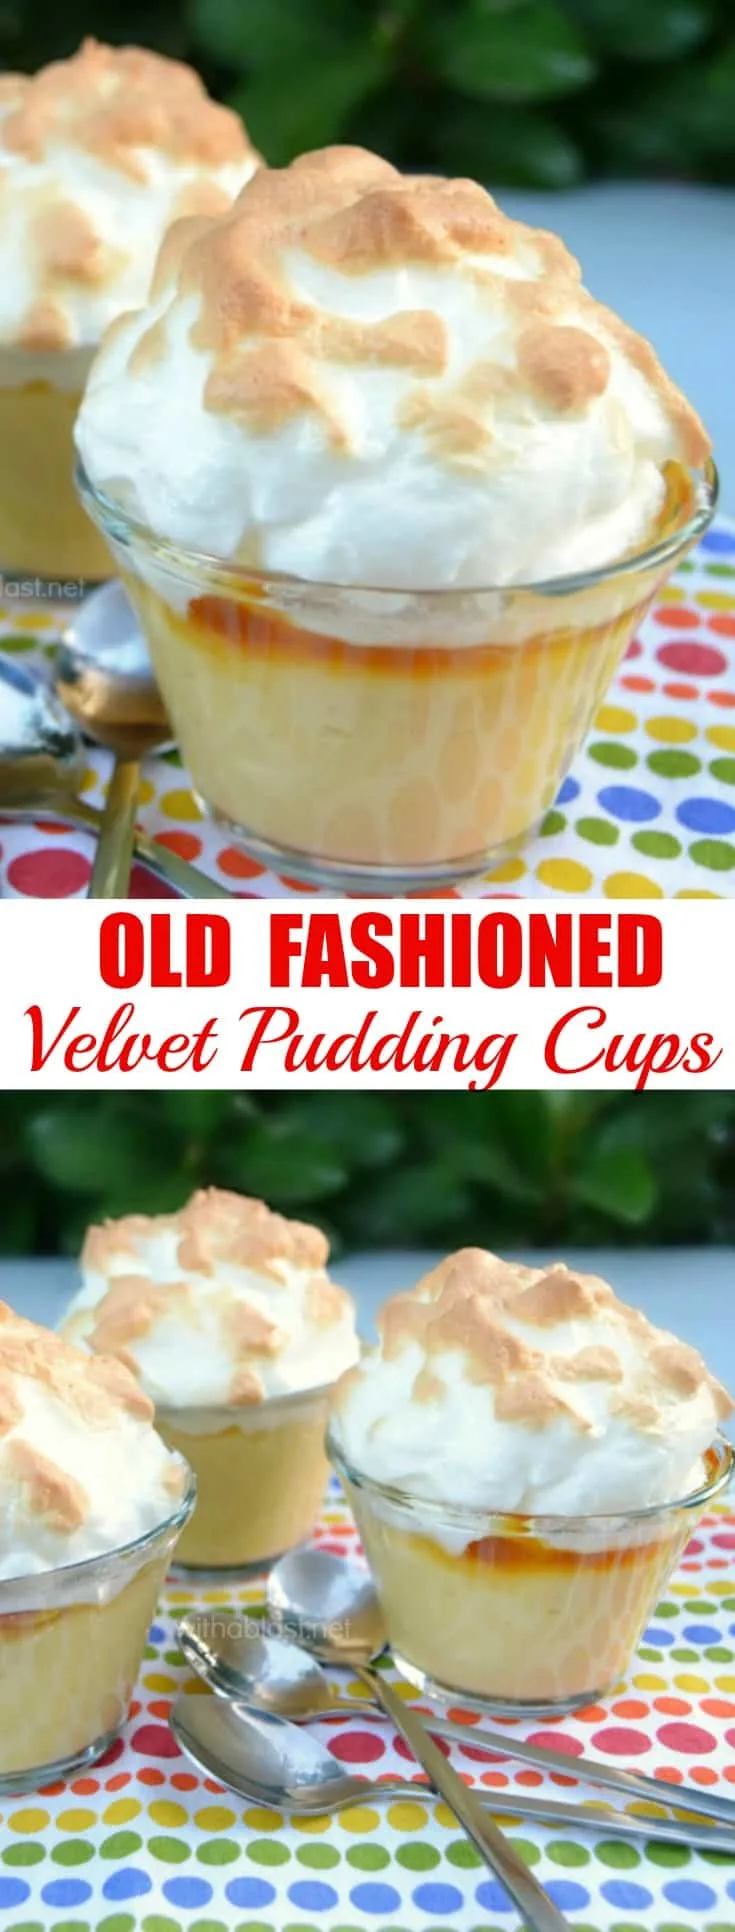 Old-Fashioned Velvet Pudding Cups (also known as Fluweel Poeding) are silky smooth with a delicious sweet layer between the pudding and the meringue - serve warm or at room temperature  #Pudding #FluweelPoeding #BakedDessert